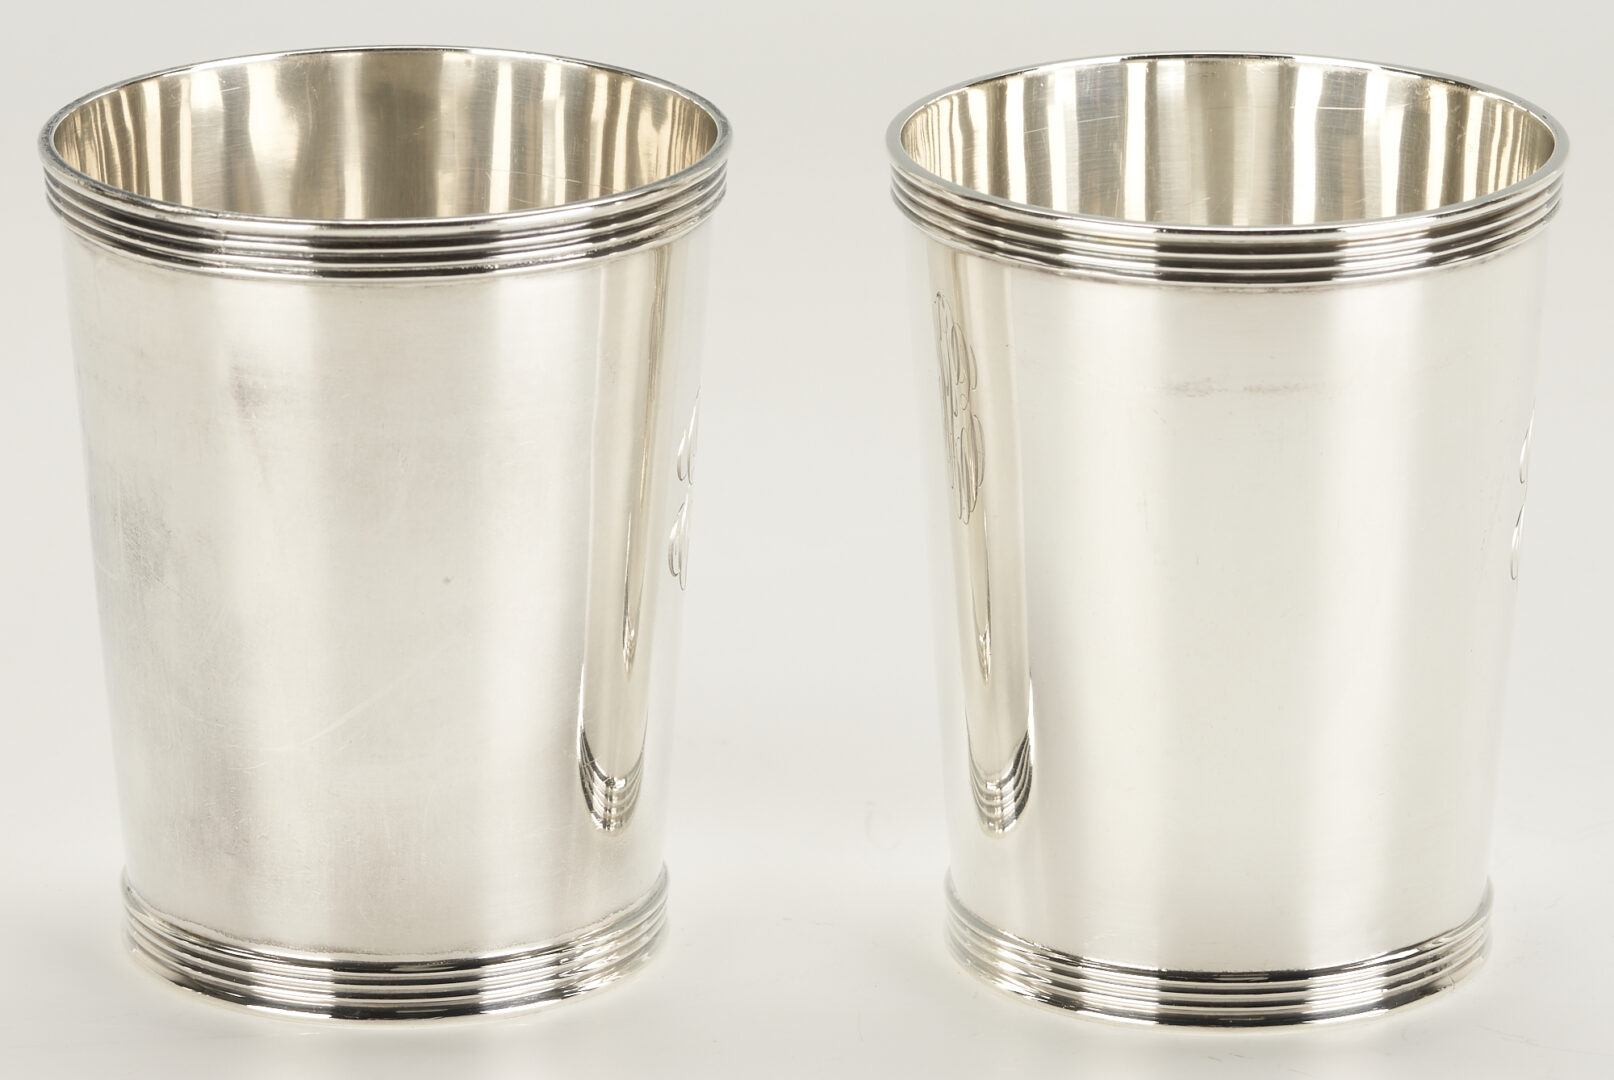 Lot 77: 7 Frank Smith Sterling Julep Cups Retailed by Bogaert, Lexington